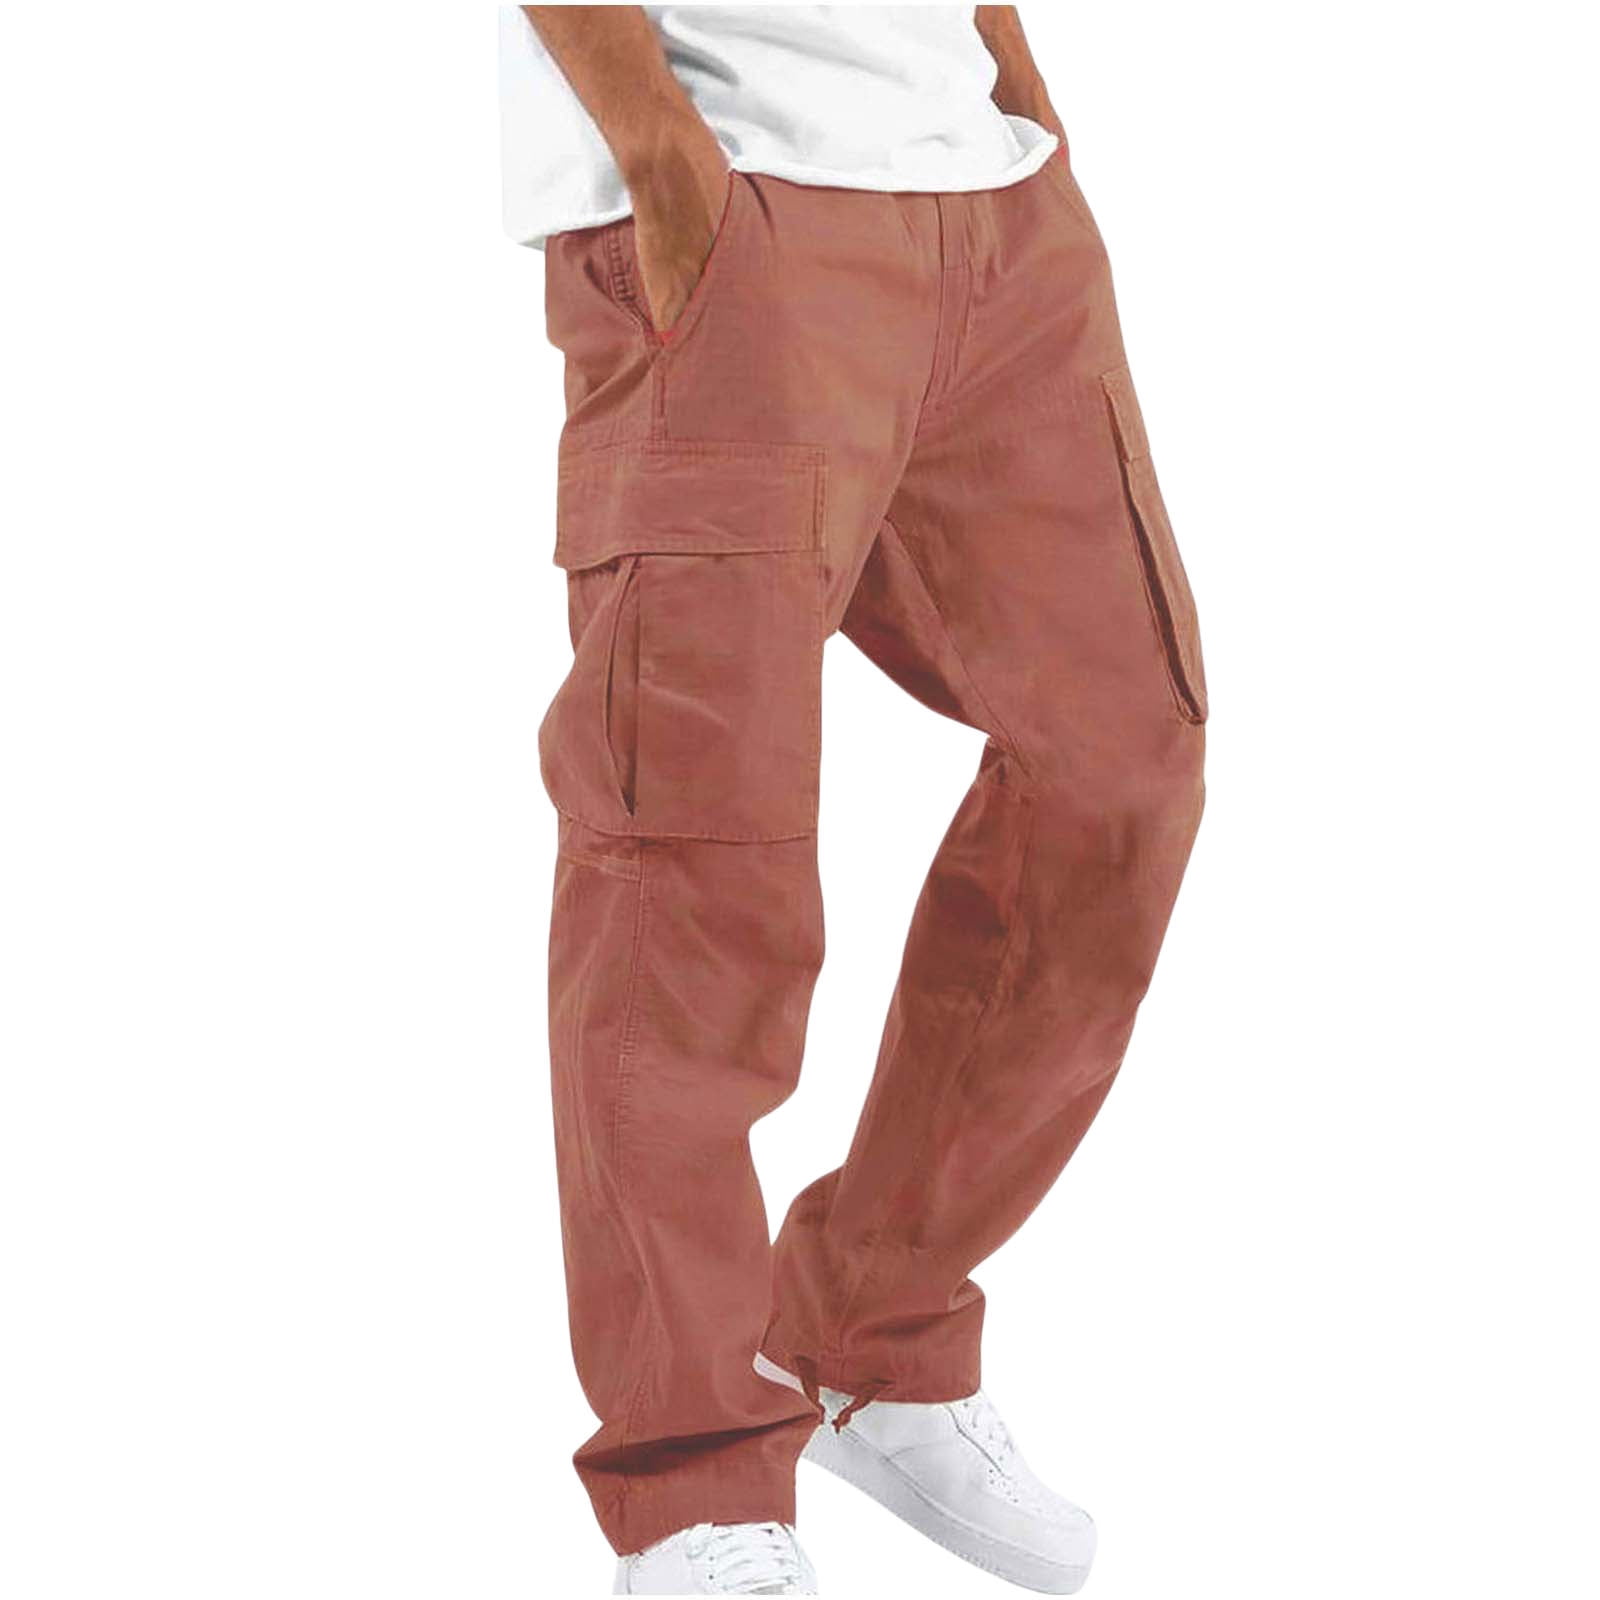 gakvbuo Cargo Pants For Men Athletic Casual Outdoor Resistant Quick Dry Fishing Hiking Pants Classic Loose Fit Work Wear Combat Safety Trousers cd8138e2 38f2 4fa8 898b cb1215b84b0d.9d980742dd08144f656b41beb52fa19c